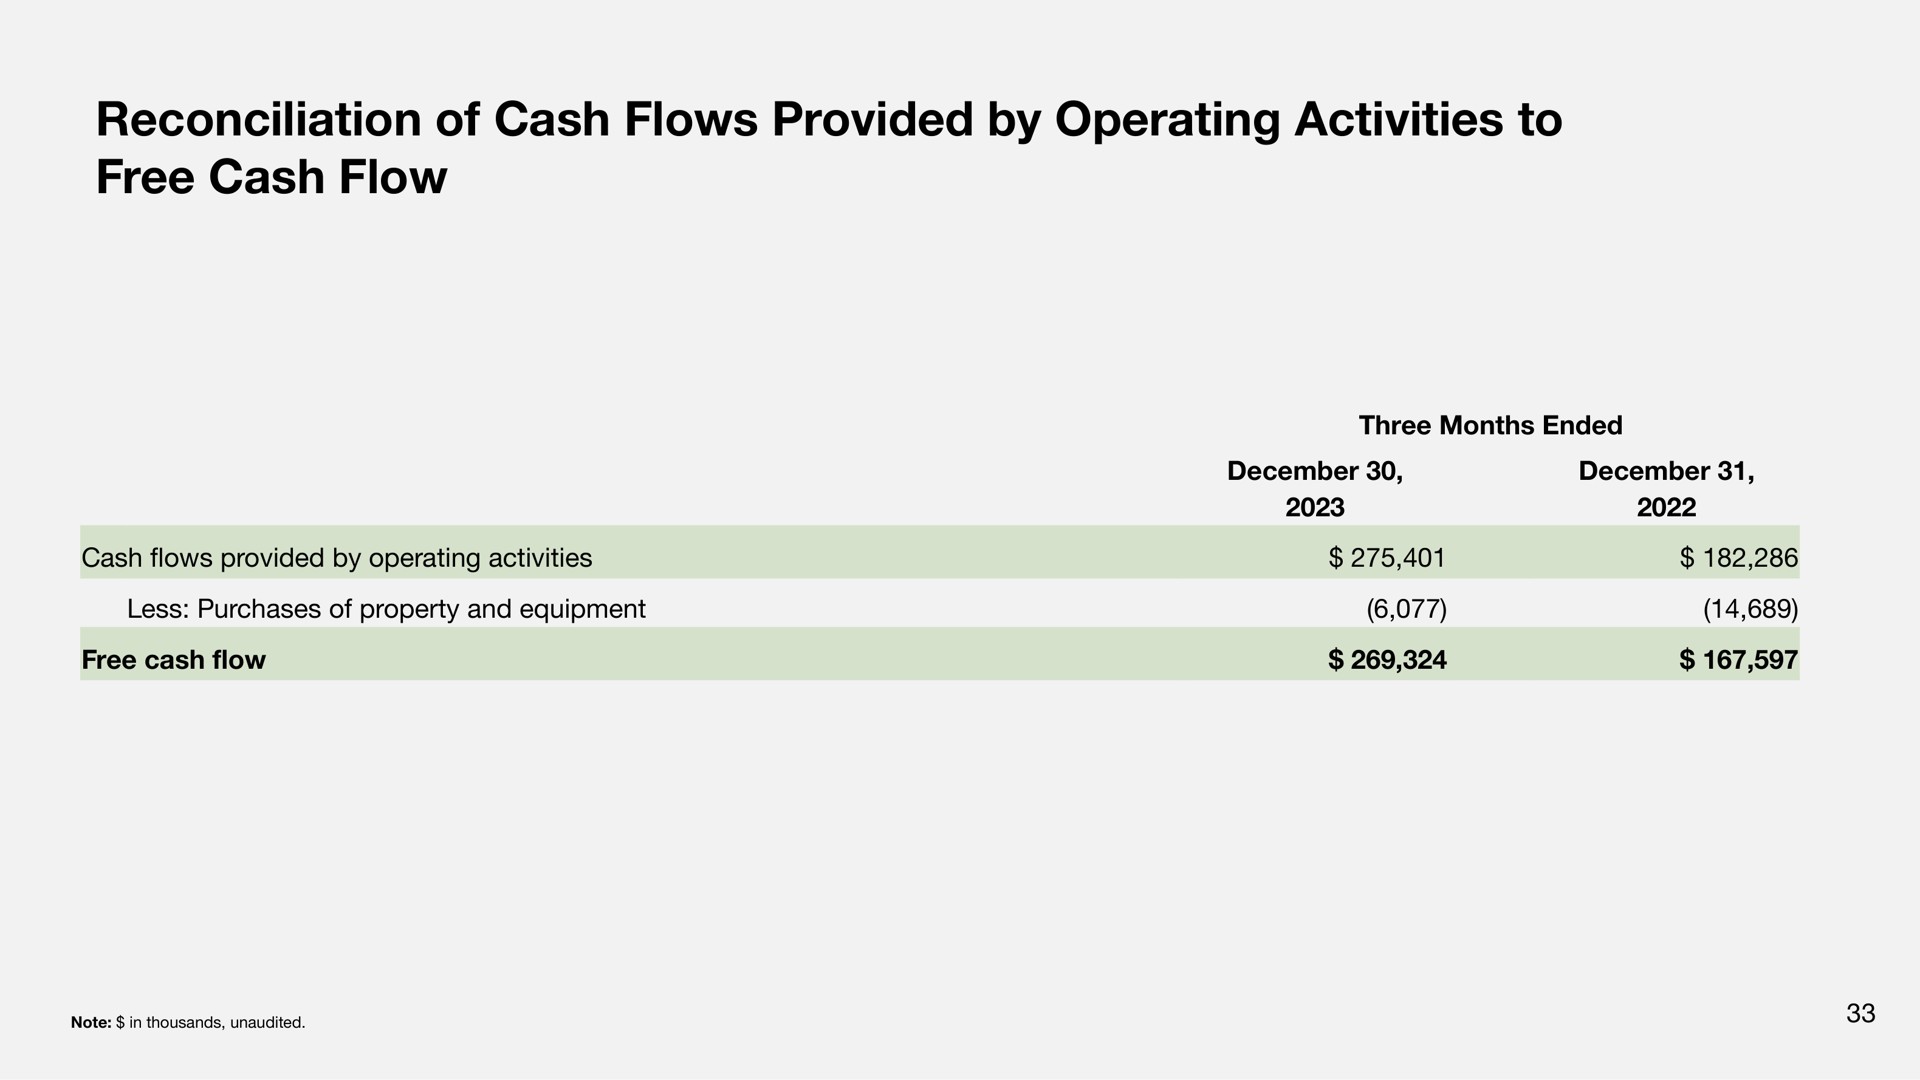 reconciliation of cash flows provided by operating activities to free cash flow | Sonos